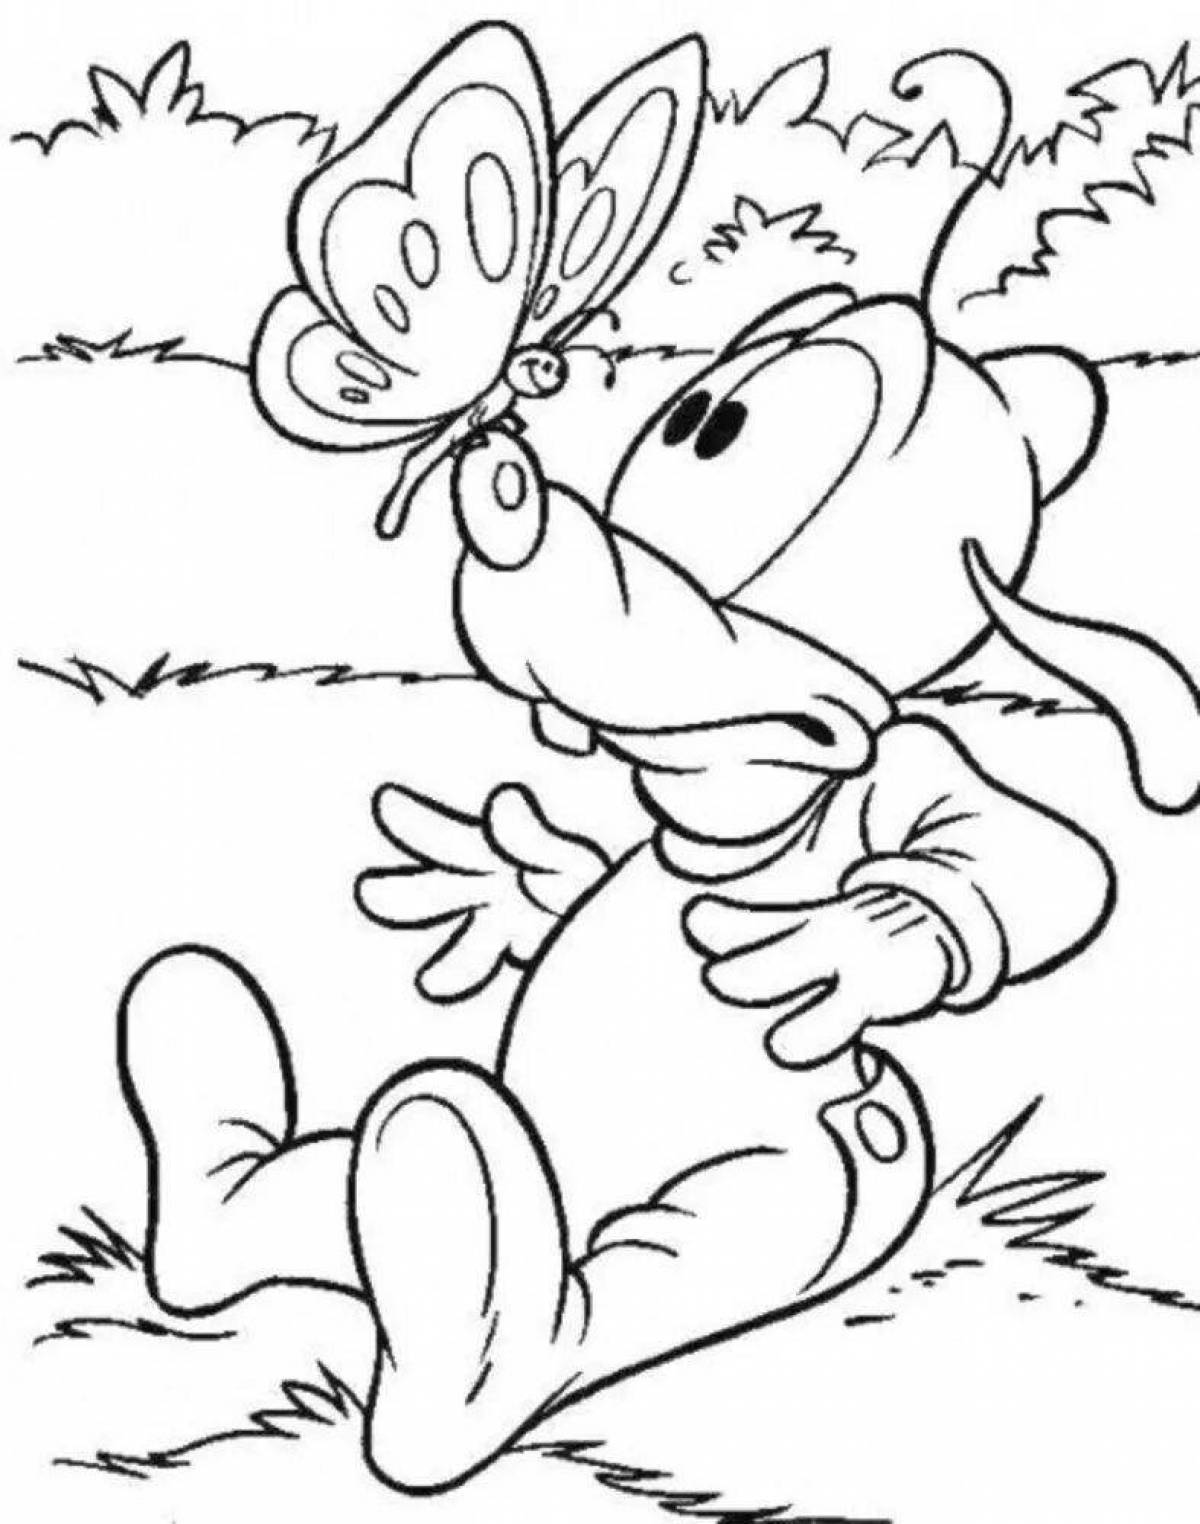 Colorful cartoon character coloring page